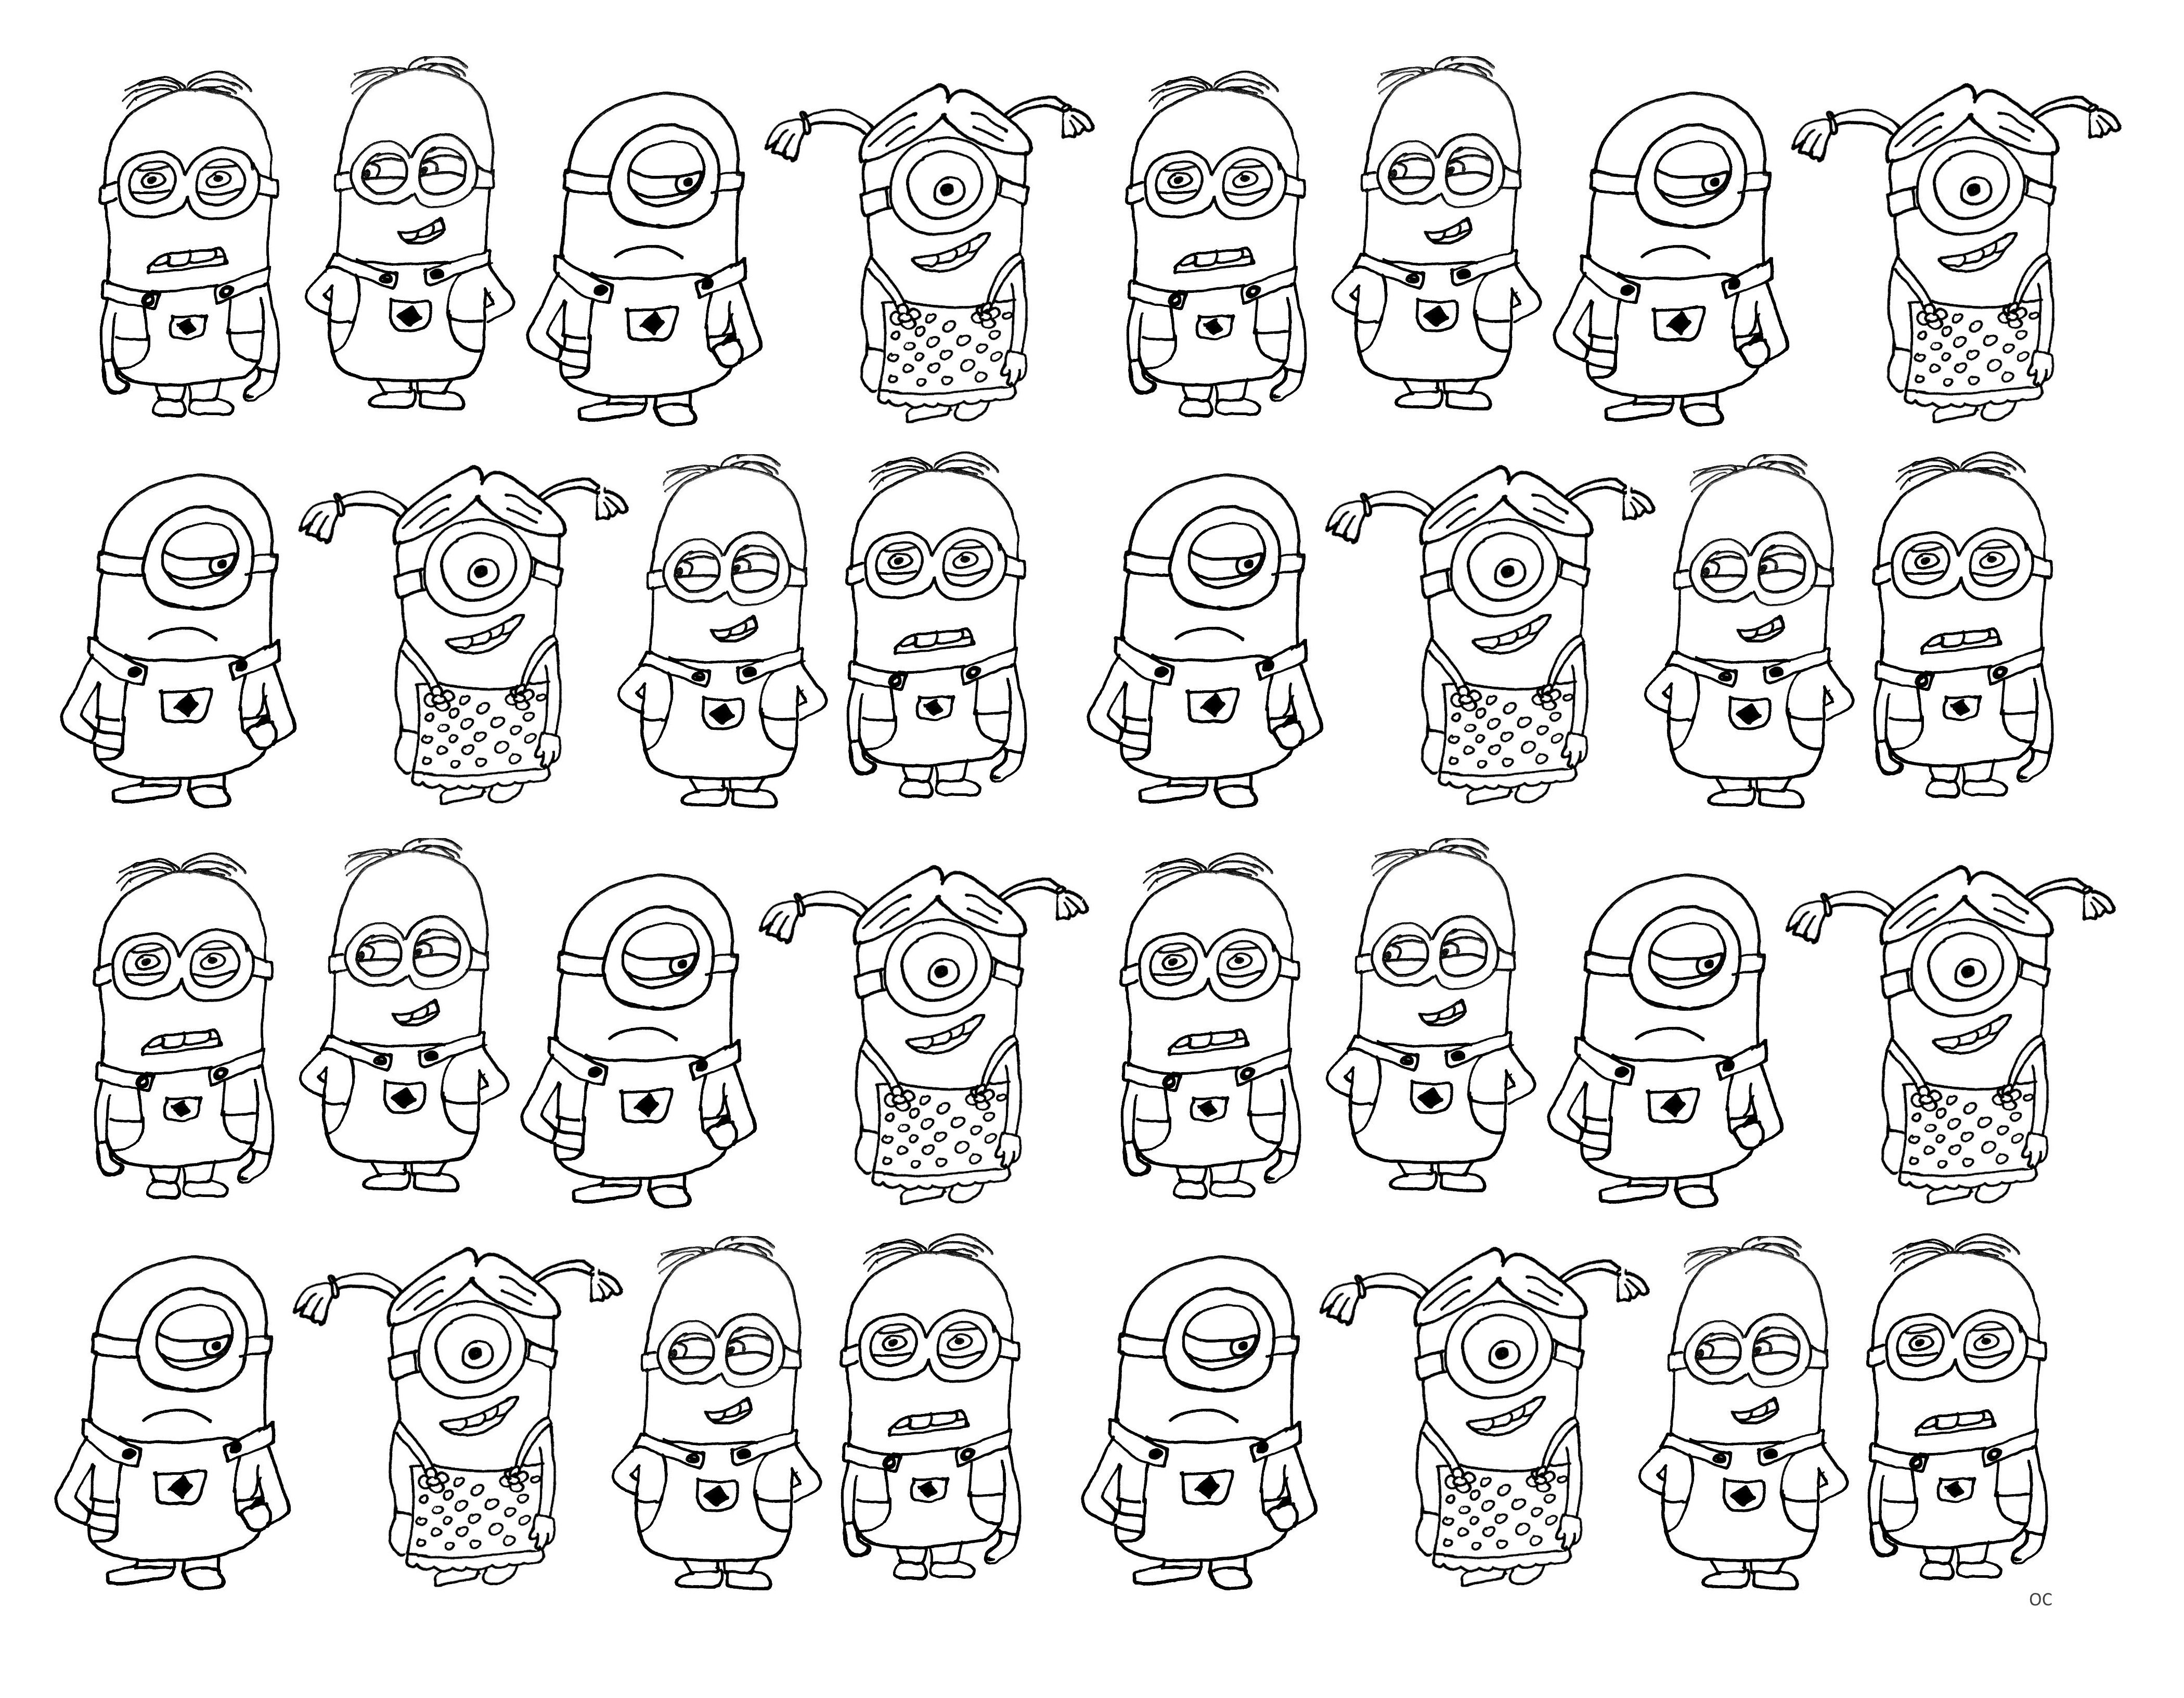 Many Minions to color